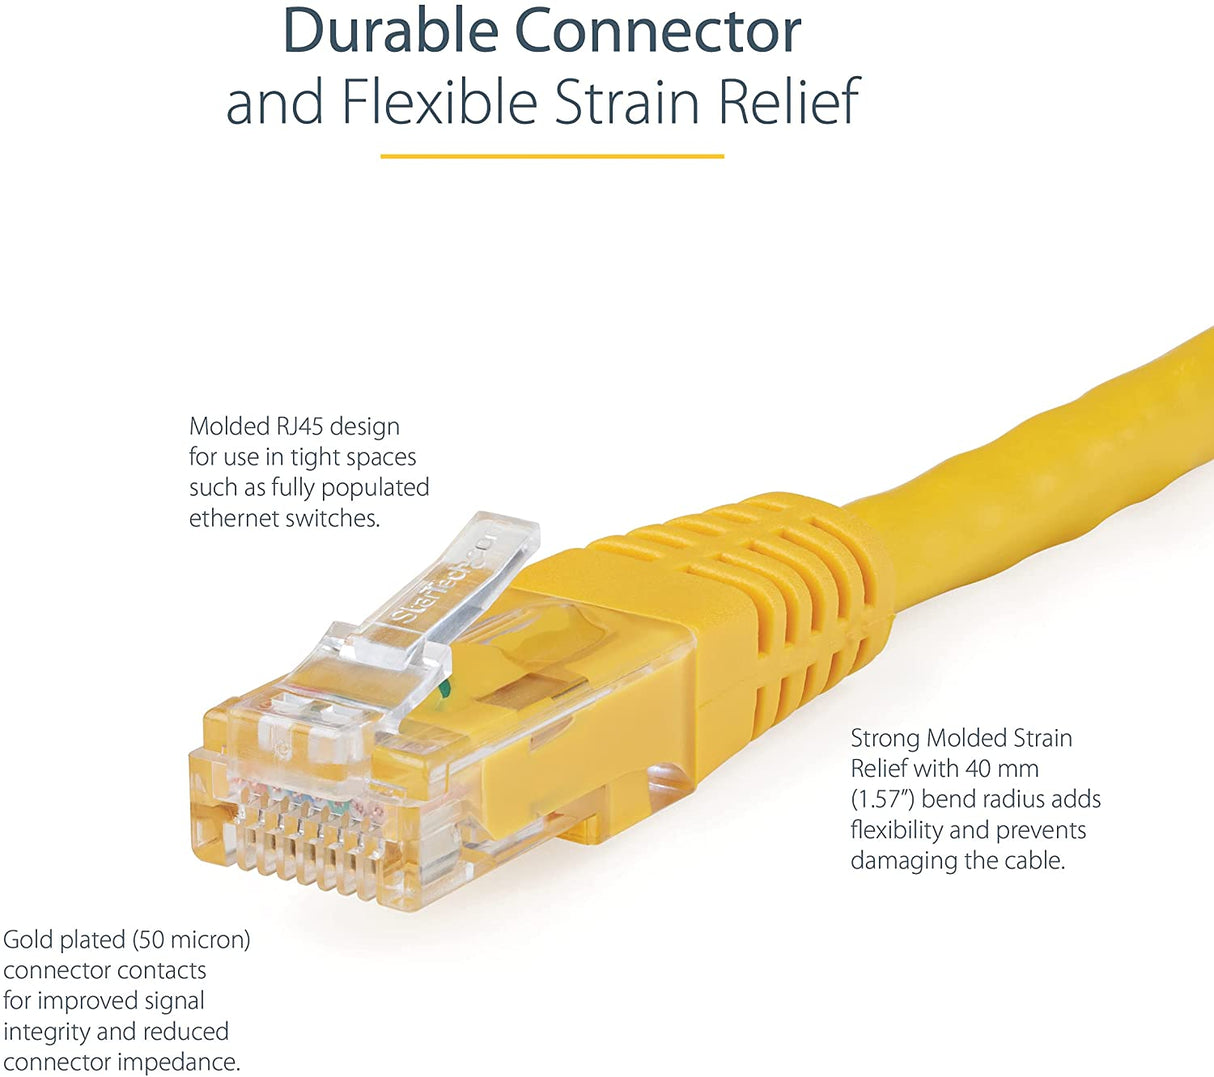 StarTech.com 5ft CAT6 Ethernet Cable - Yellow CAT 6 Gigabit Ethernet Wire -650MHz 100W PoE++ RJ45 UTP Molded Category 6 Network/Patch Cord w/Strain Relief/Fluke Tested UL/TIA Certified (C6PATCH5YL) Yellow 5 ft / 1.5 m 1 Pack